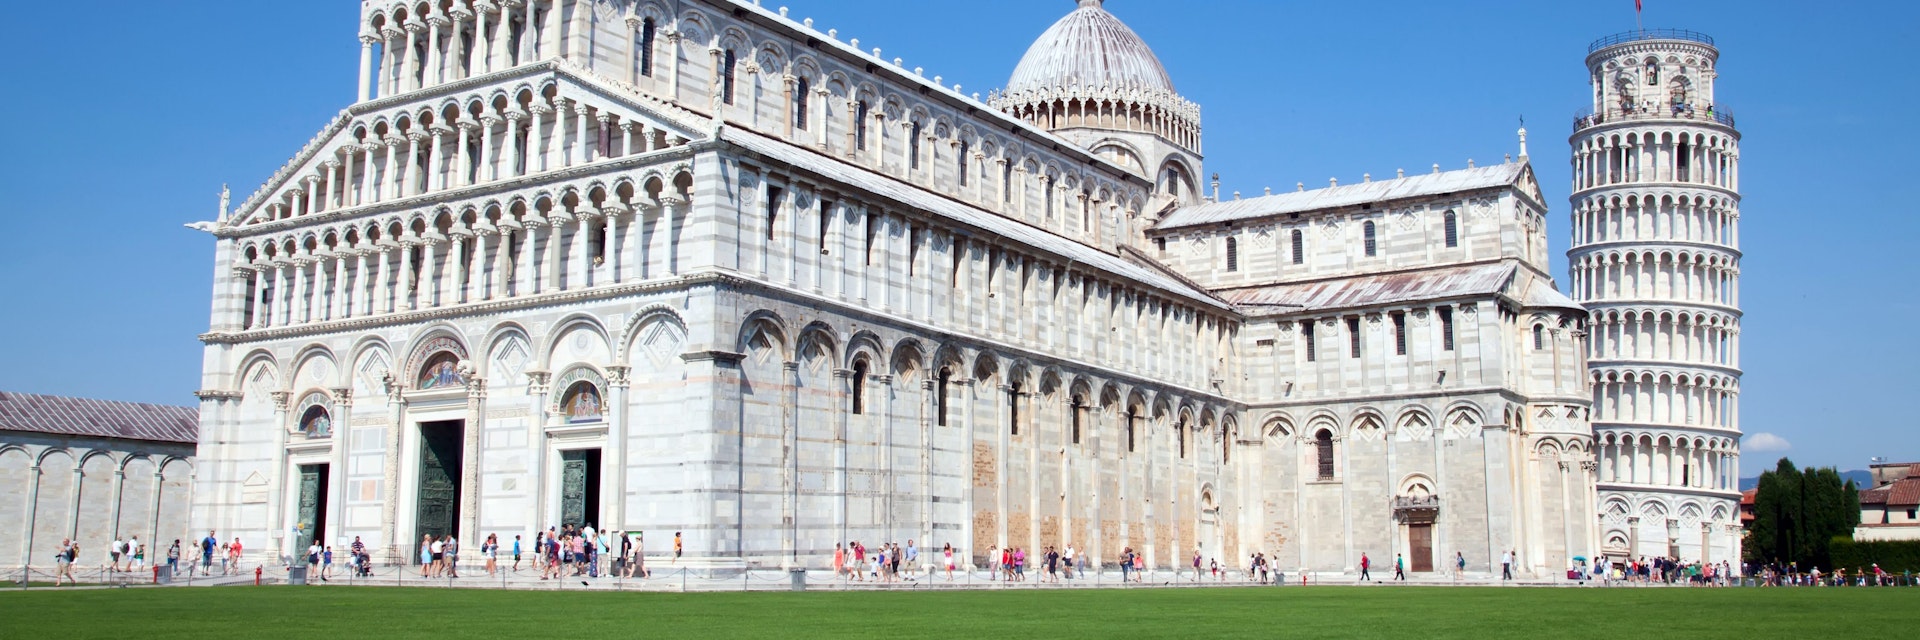 Leaning tower of Pisa, Italy
Piazza del Duomo
; Shutterstock ID 456166966; your: Bridget Brown; gl: 65050; netsuite: Online Editorial; full: POI Image Update